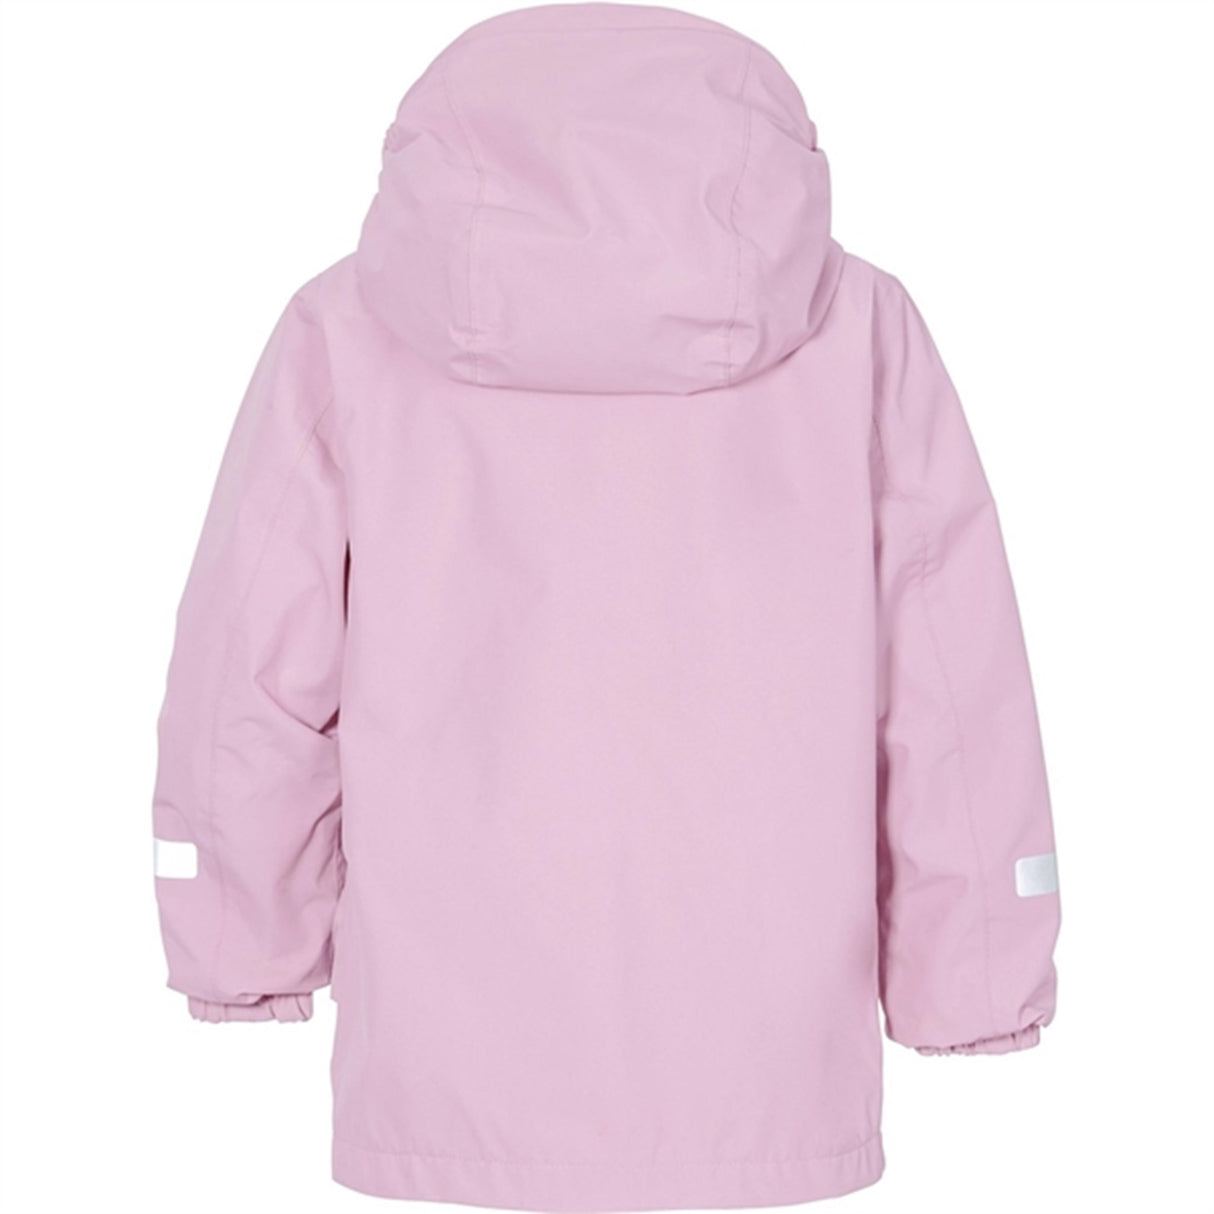 Didriksons Orchid Pink Norma Kids Jacket 5